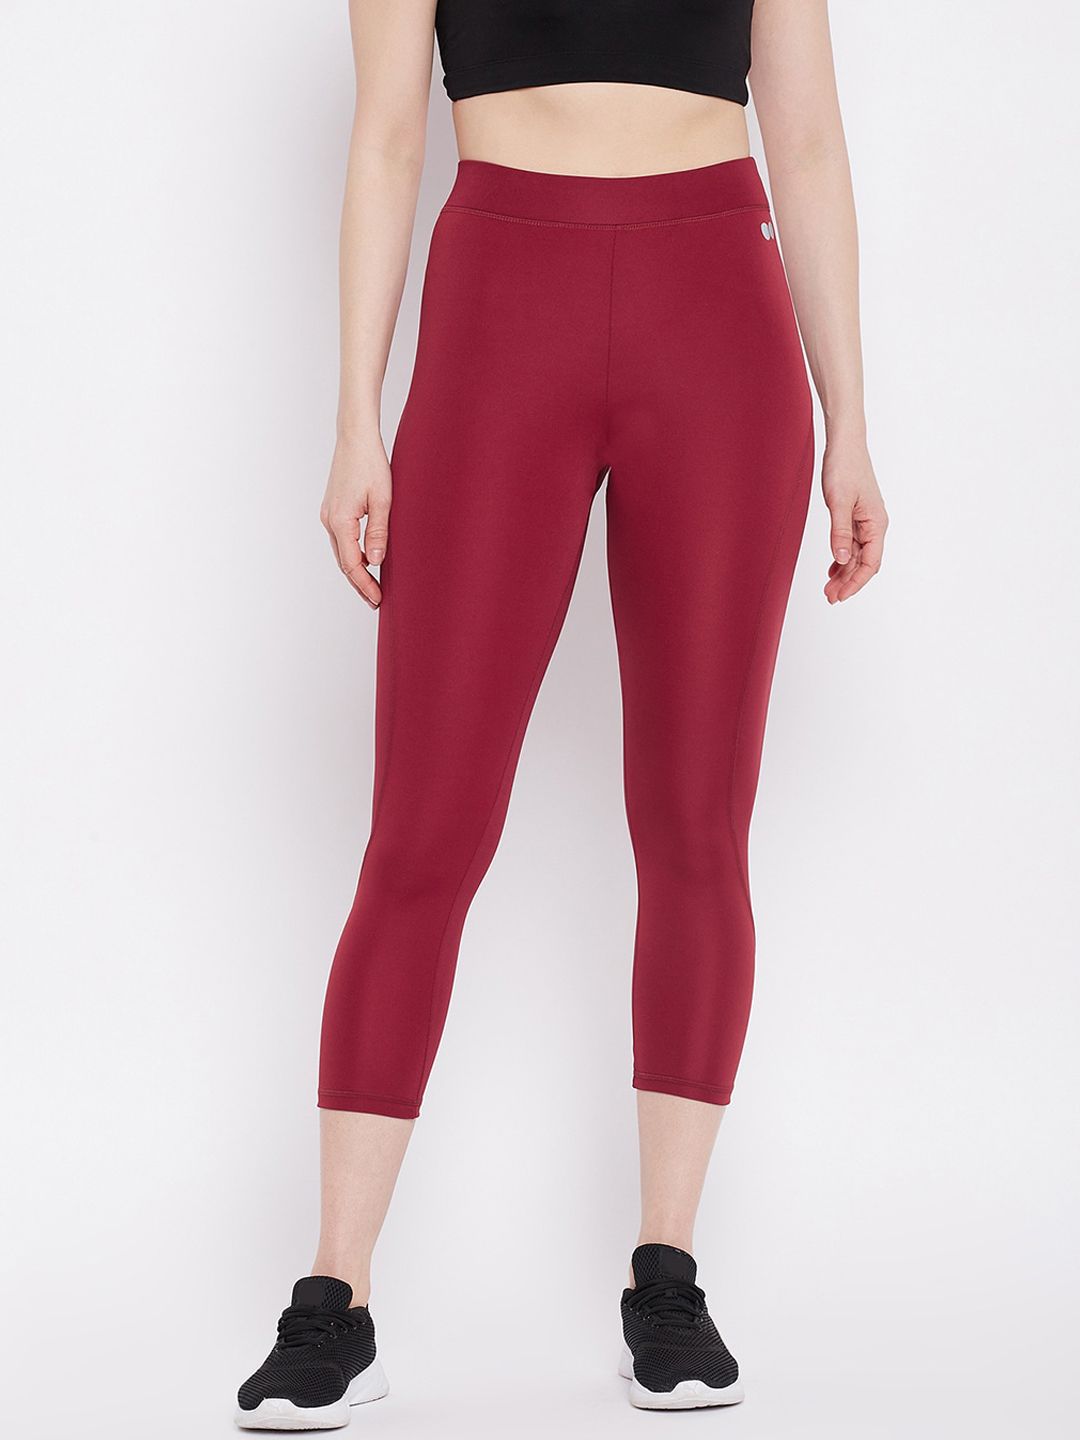 Clovia Women Maroon Solid Ankle-Length Tights Price in India